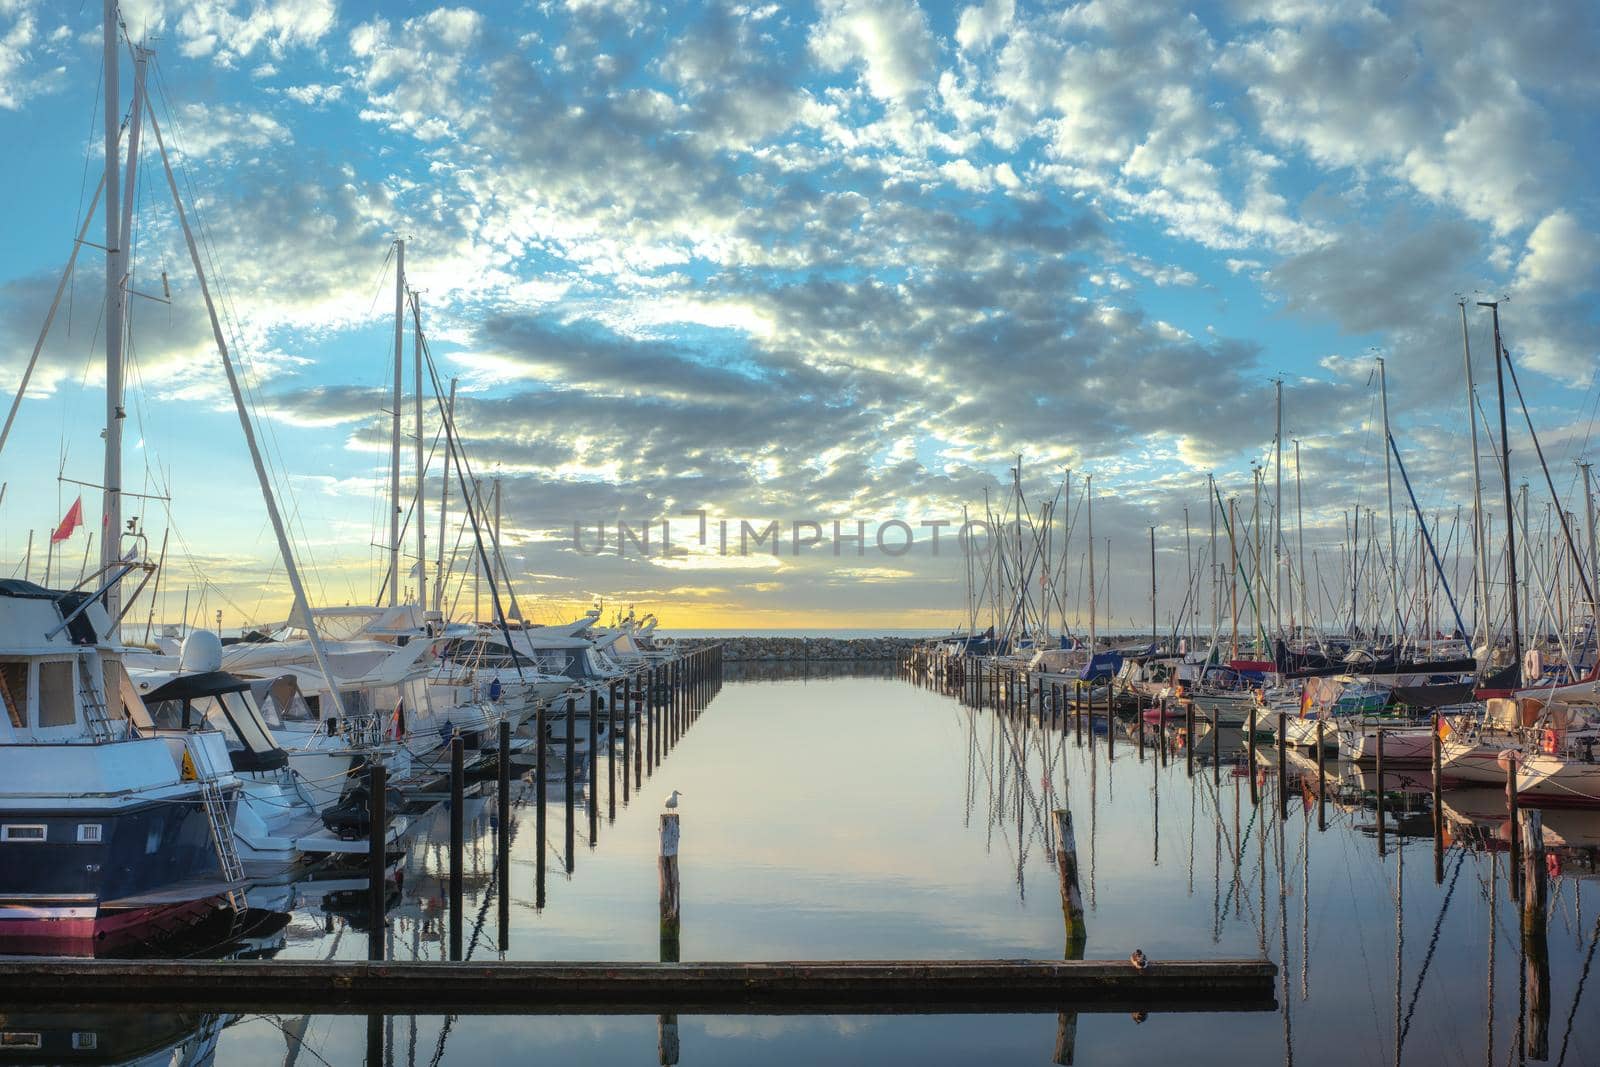 Boat jetty with yachts on a pier in the morning